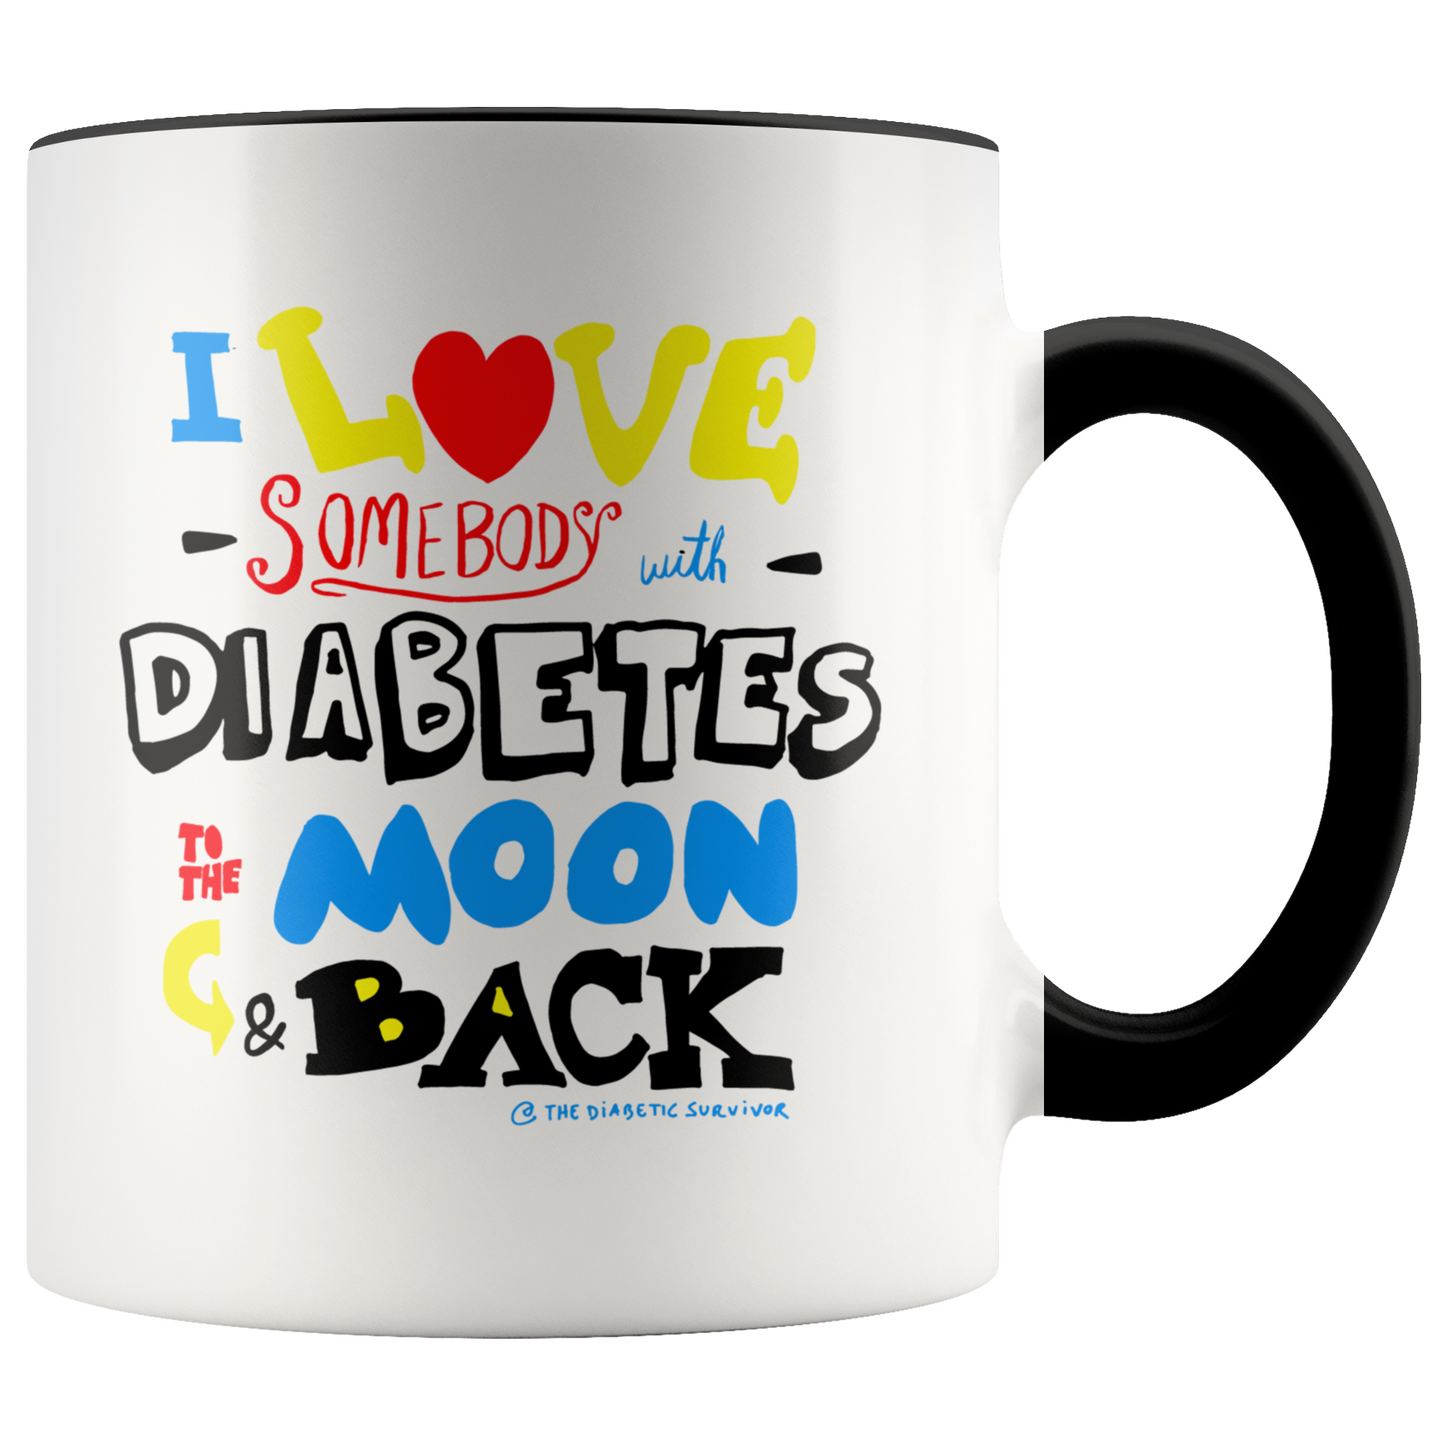 I love somebody with diabetes to the moon & back